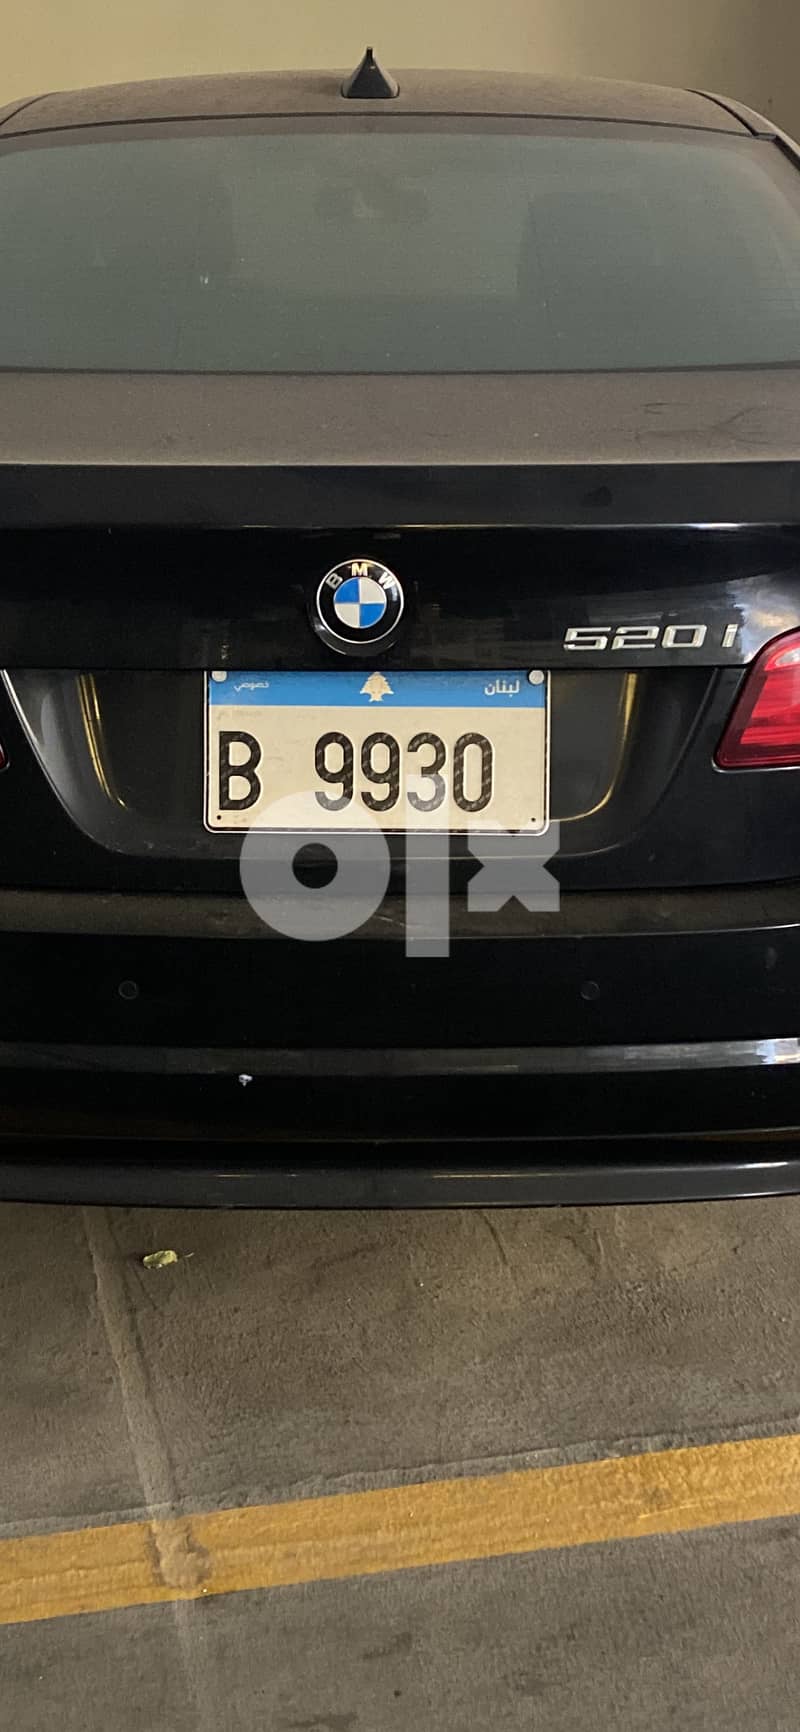 Eye catching 4 digit Number Plate - 9930 1